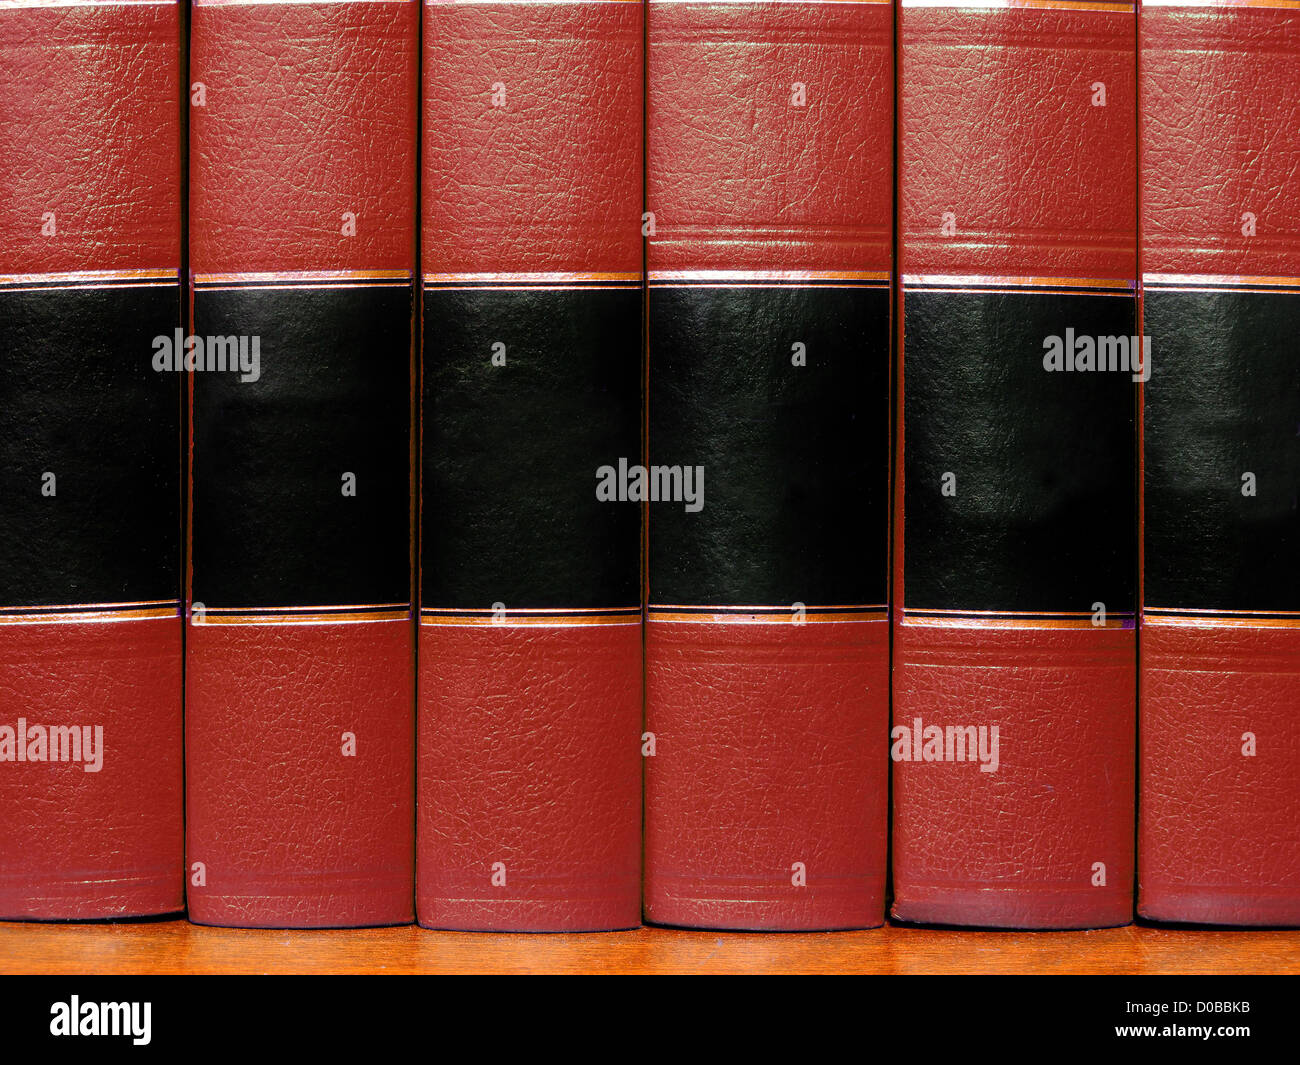 Row of old red leather books on a shelf with blank covers Stock Photo